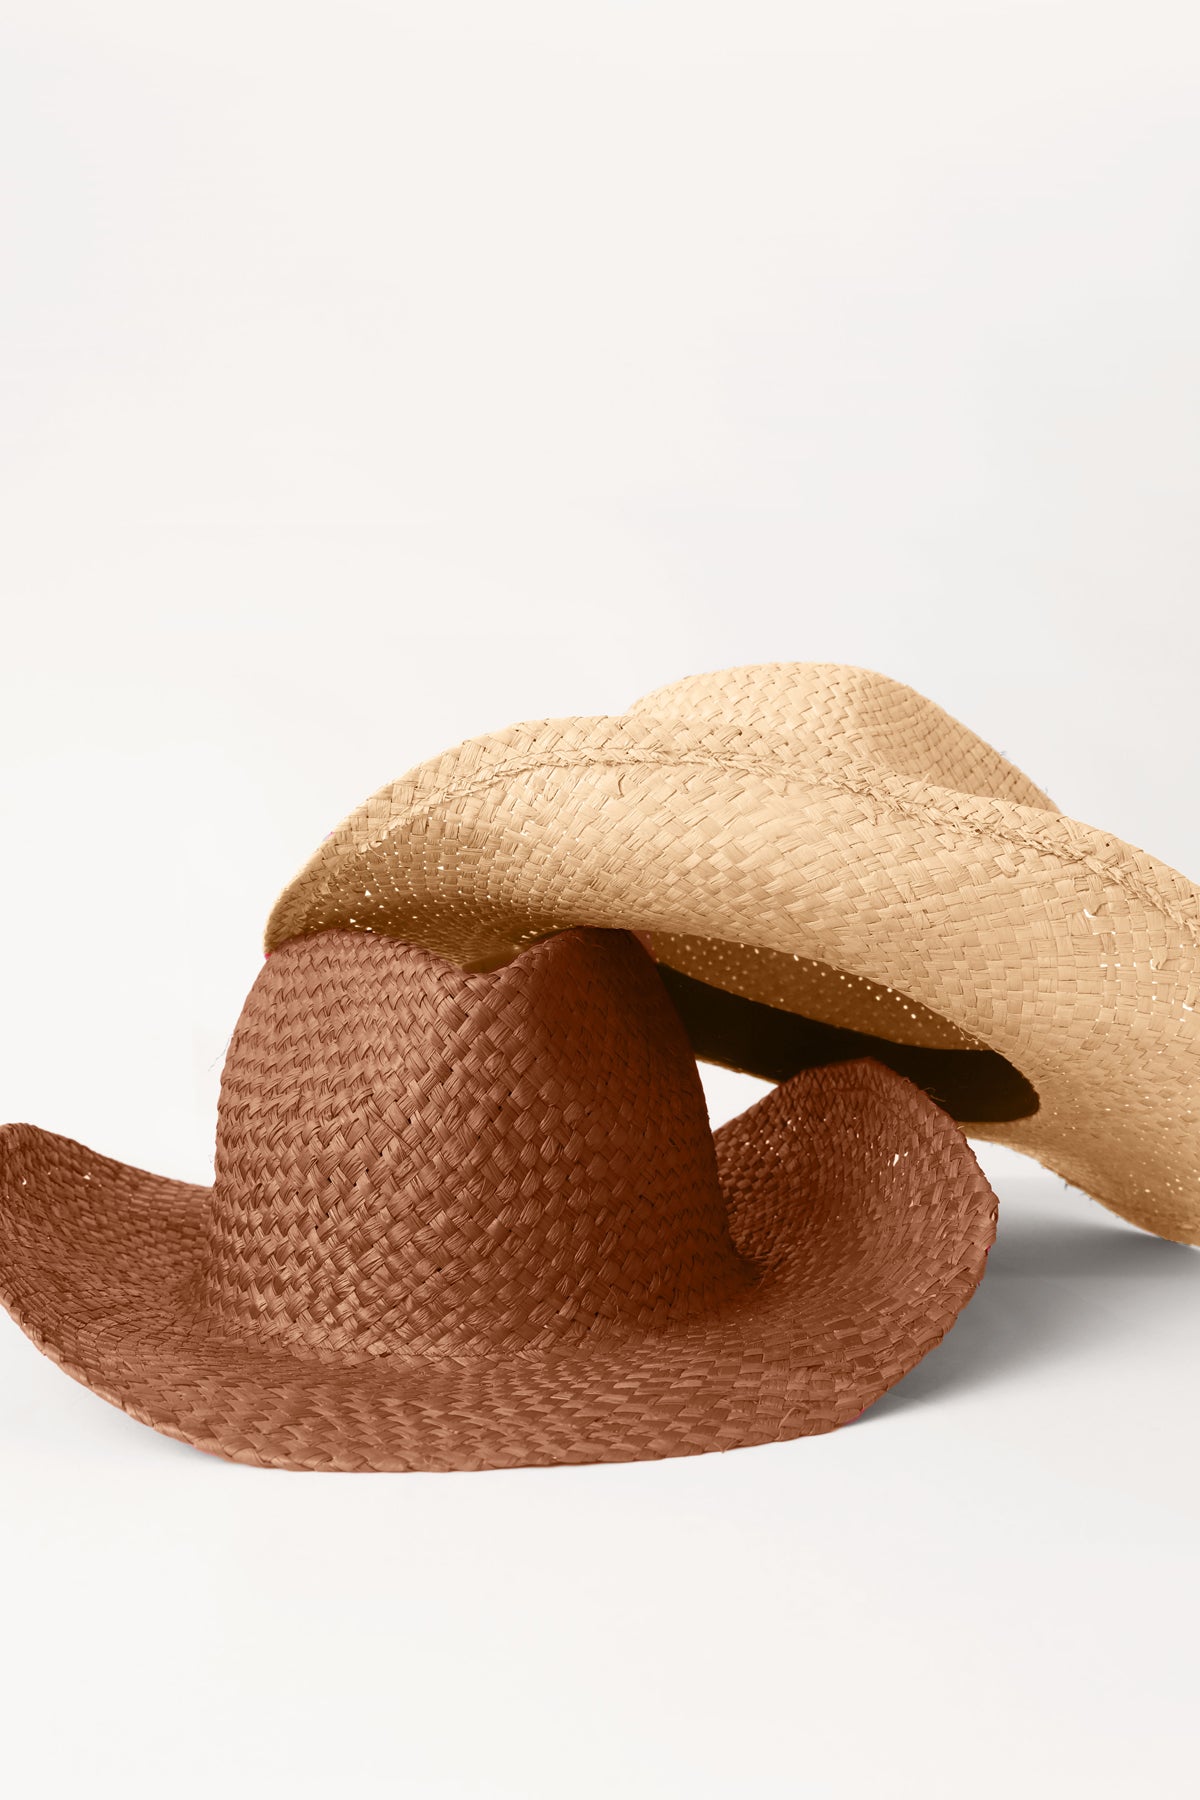 Shades of Sand straw hats.